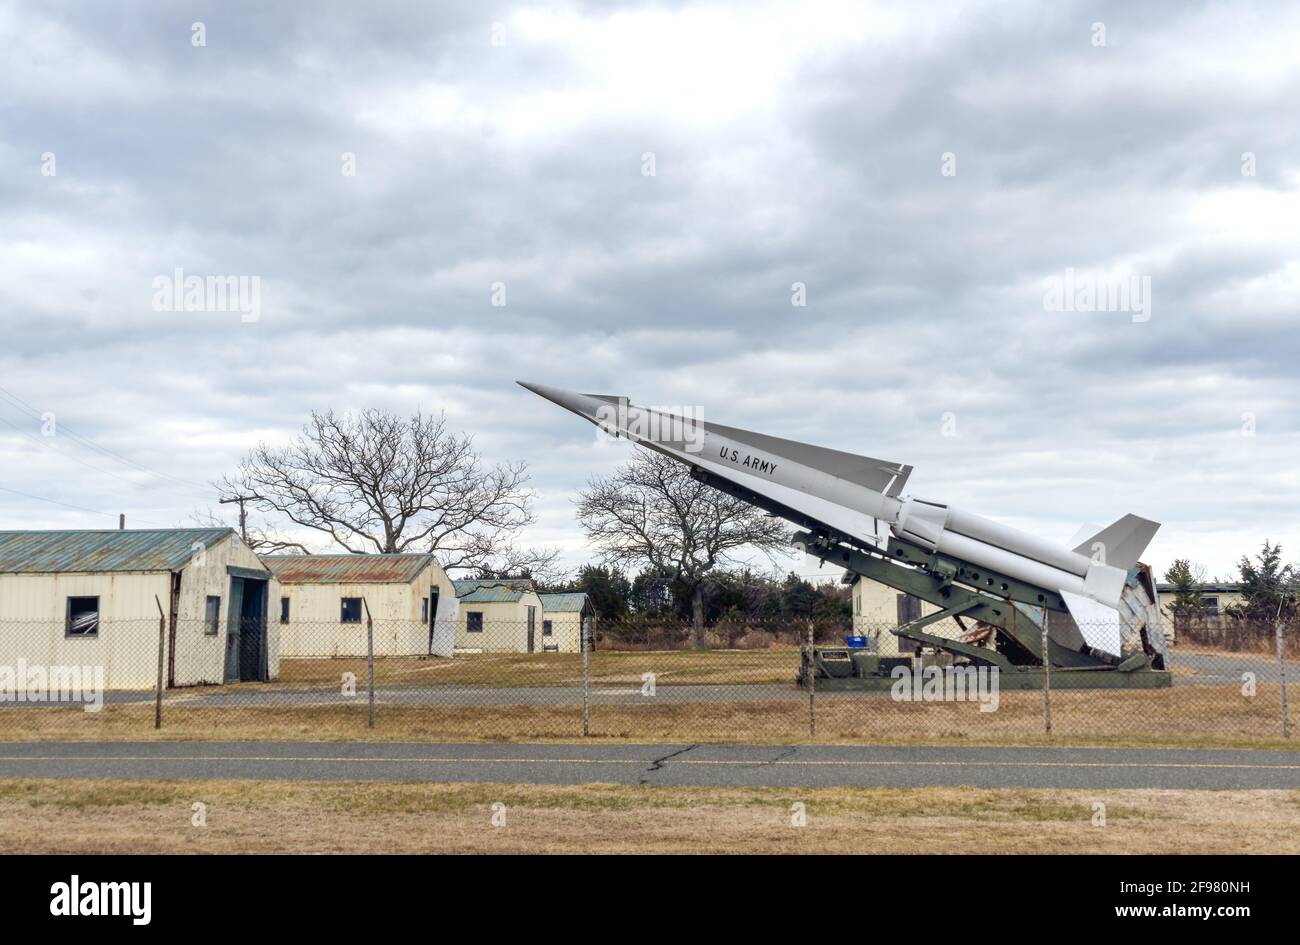 Sandy Hook, NJ - USA - Jan 17, 2021: View of a MIM-4 Nike Hercules missile  located at Fort Hancock's Nike Site NY-56. Now part of Gateway National Rec  Stock Photo - Alamy